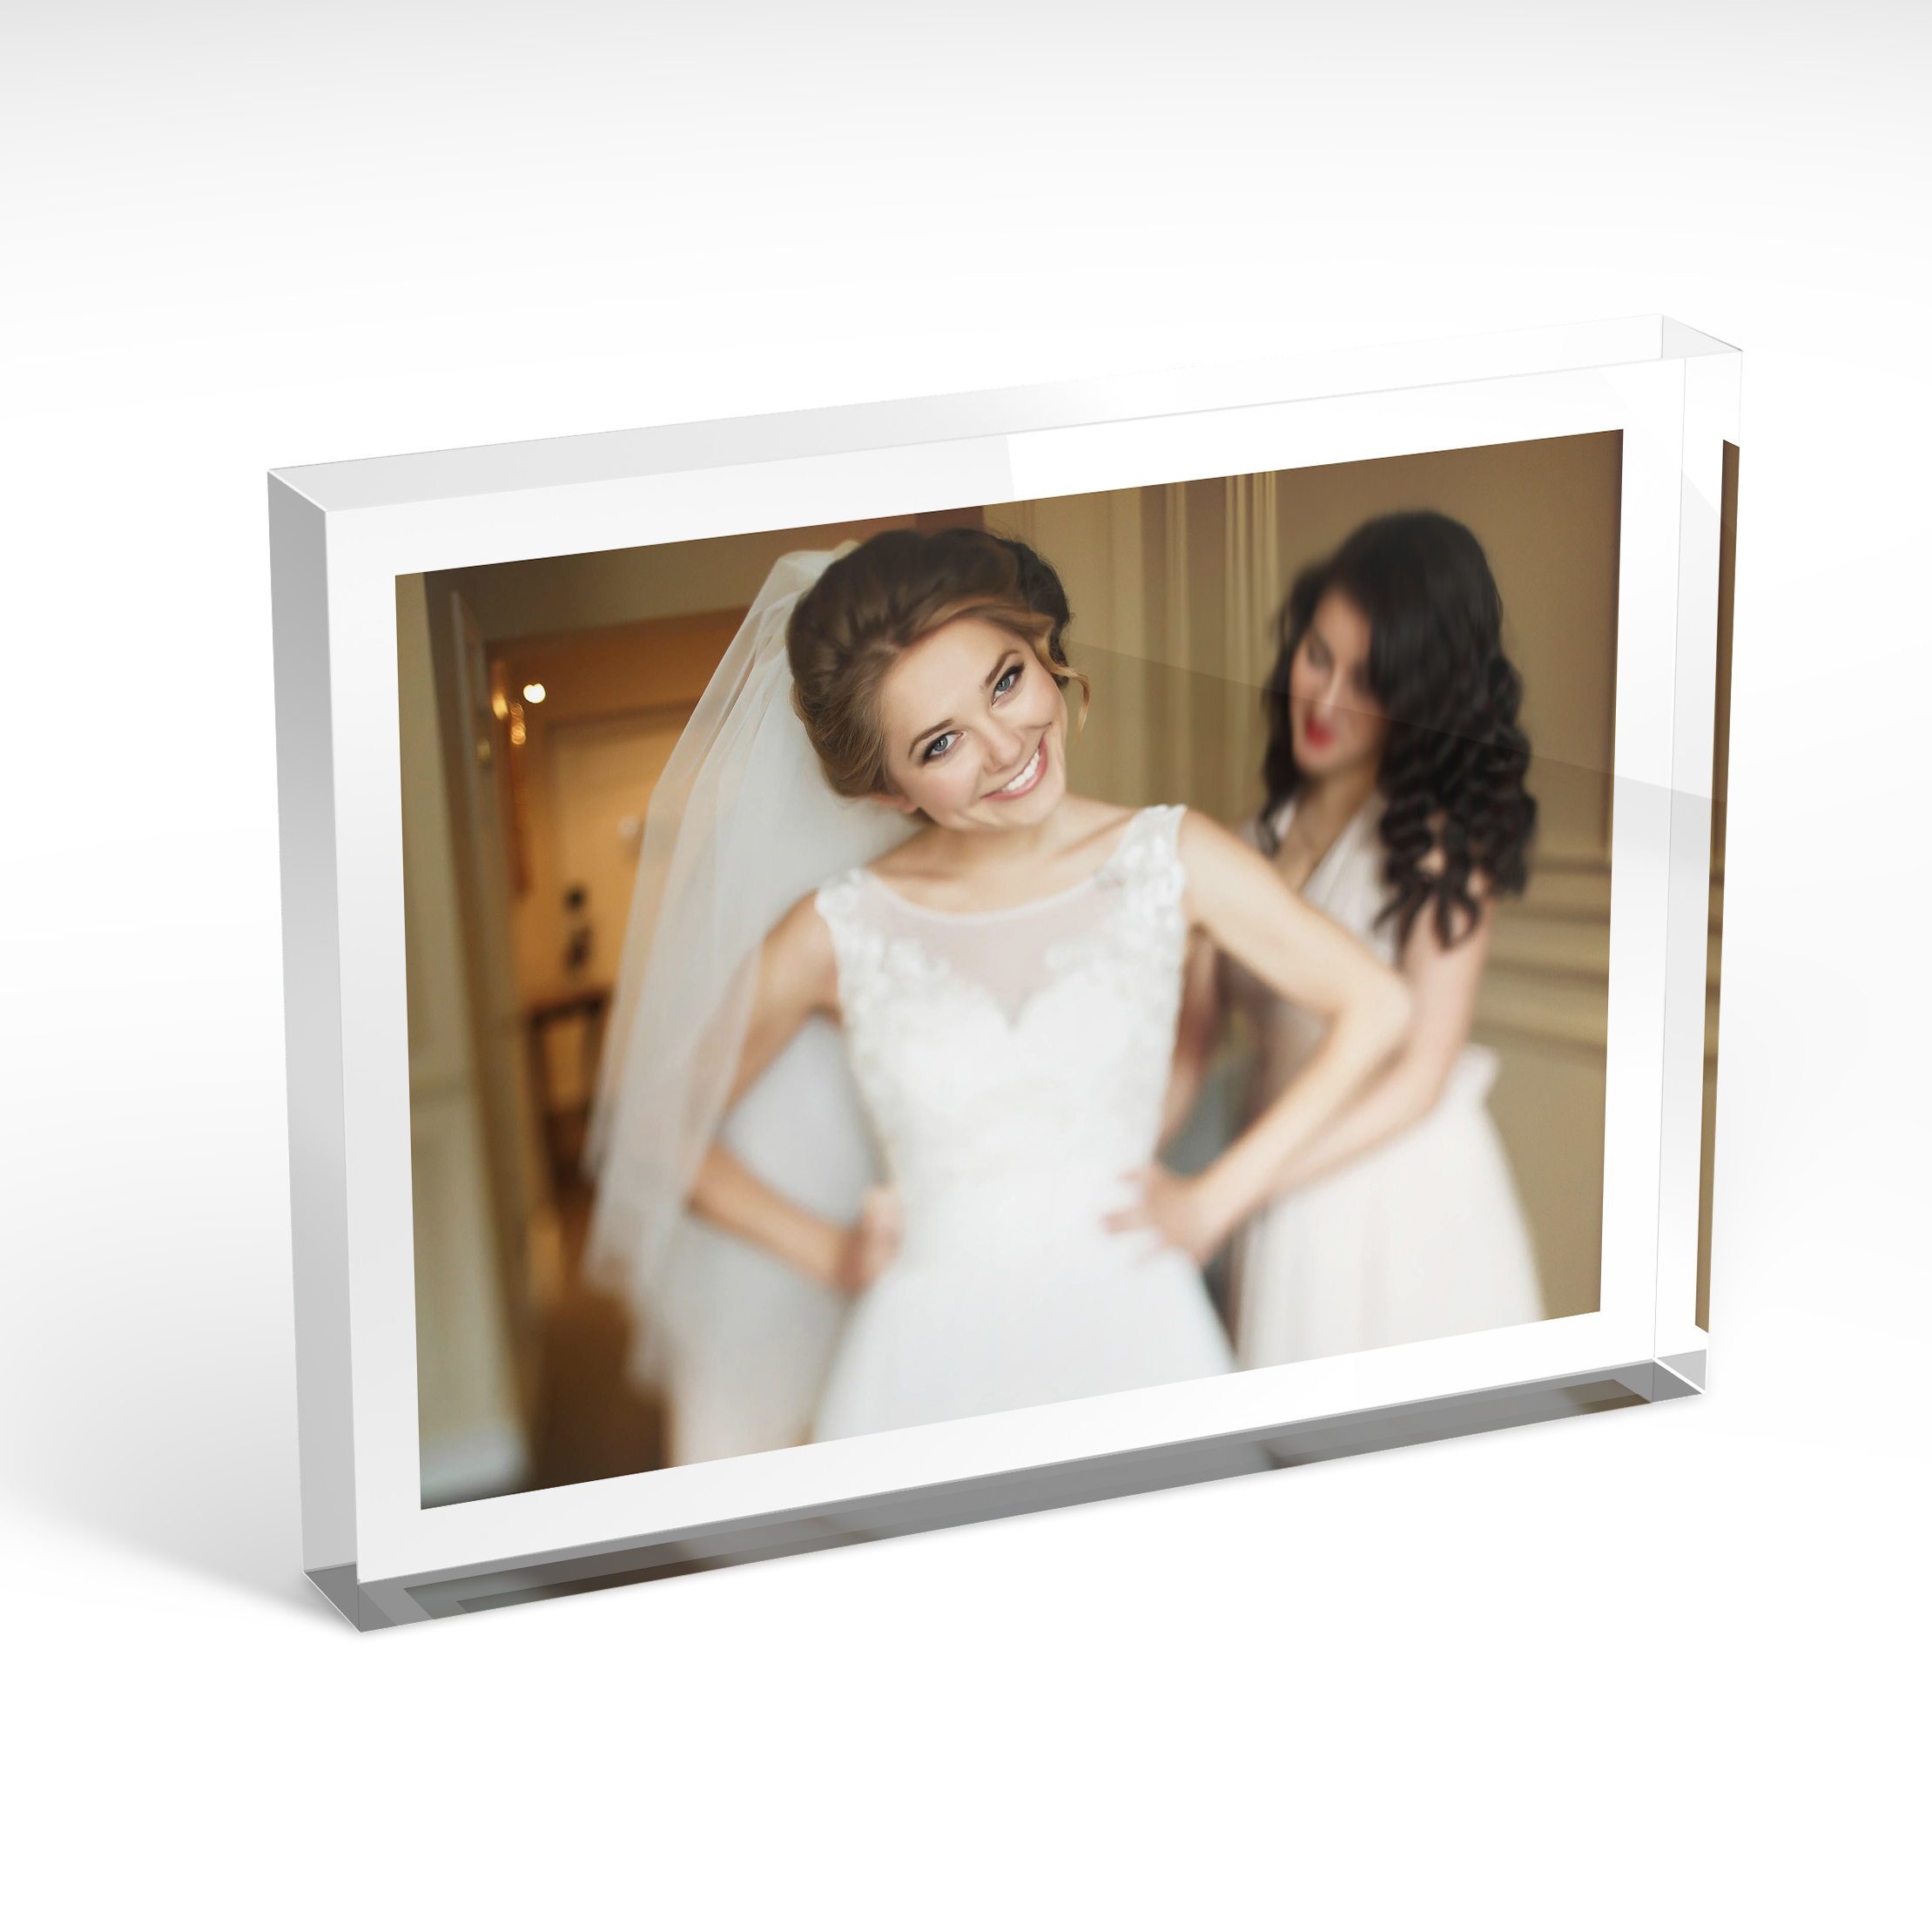 An angled side view of a landscape layout Acrylic Glass Photo Block with space for 1 photo. Thiis design is named "Landscape White". 